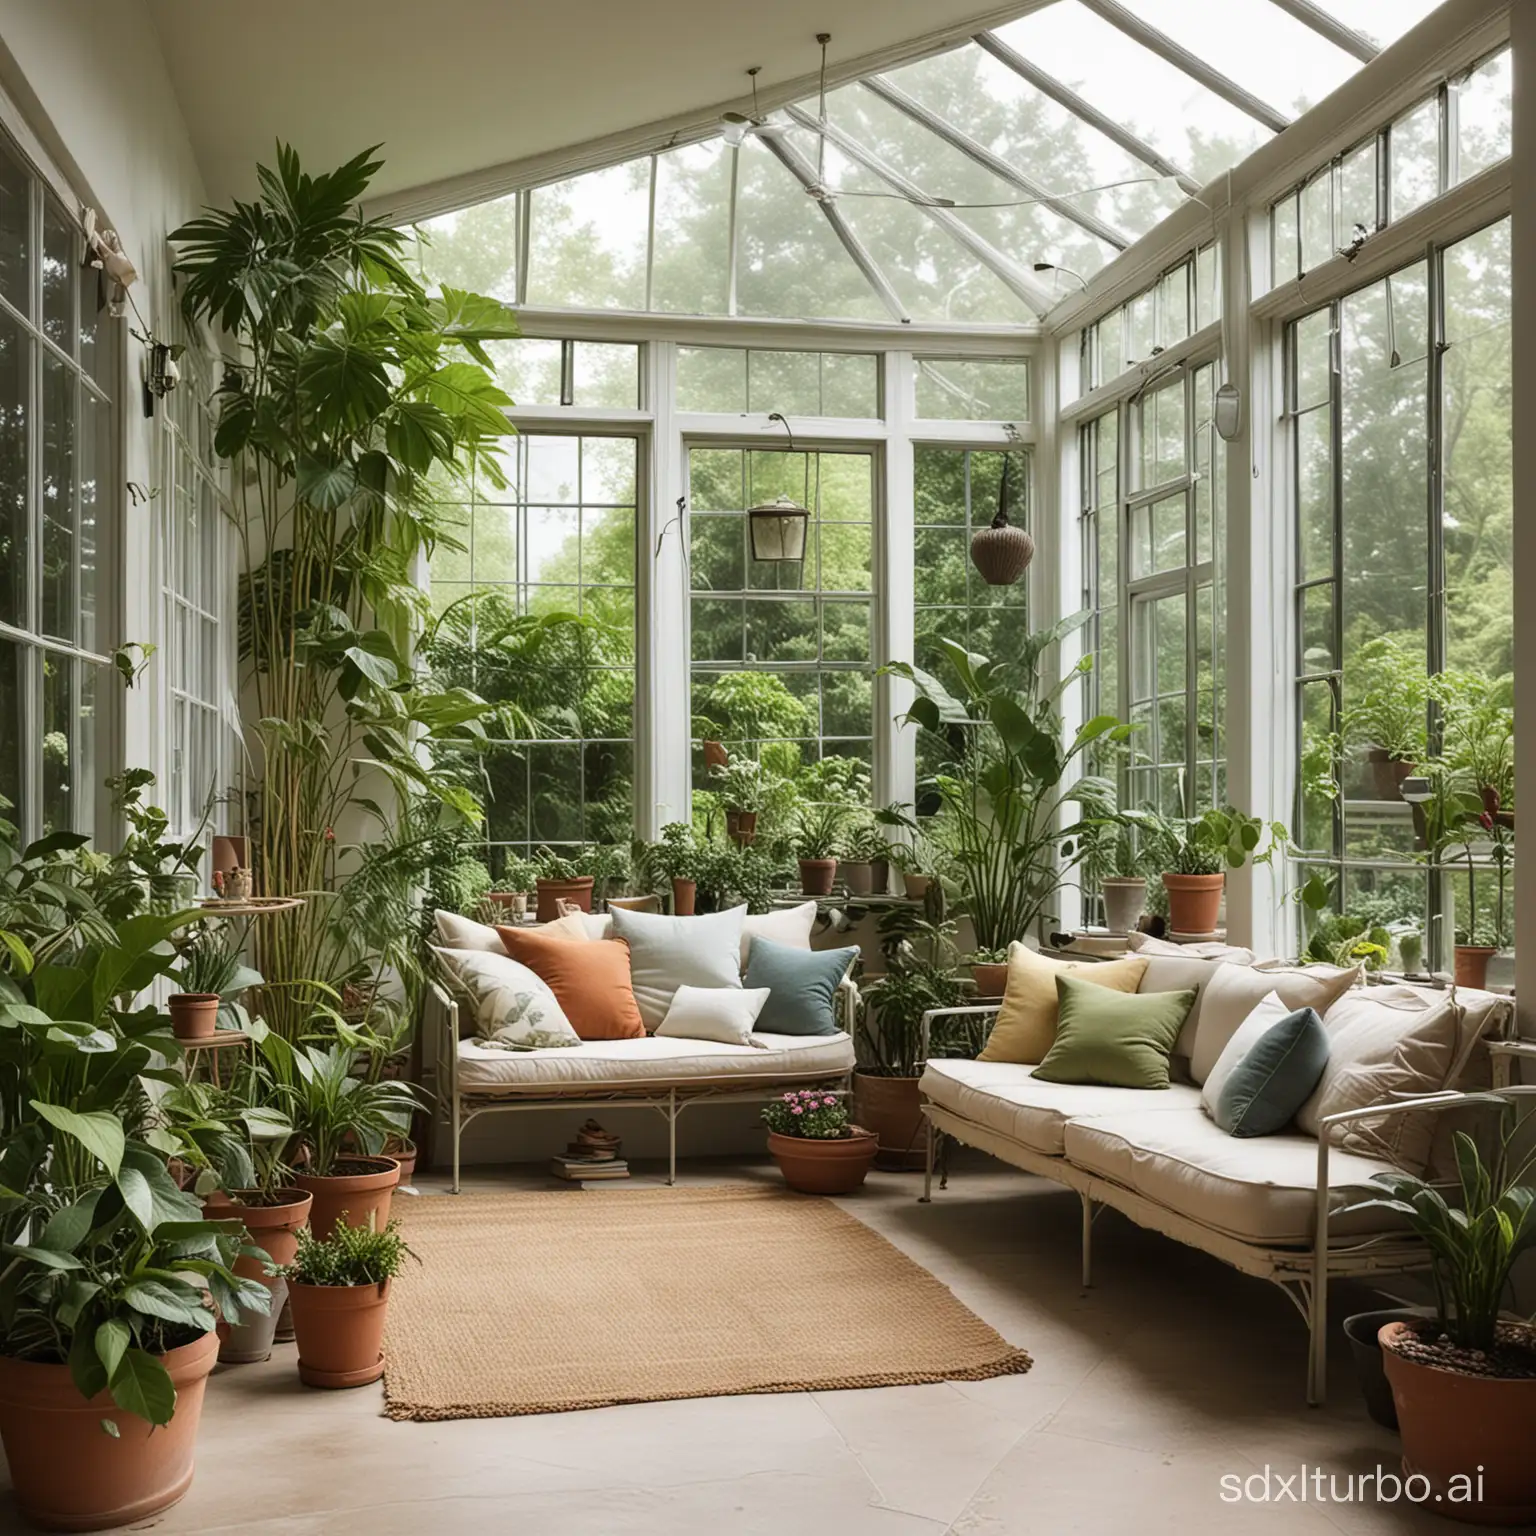 a sunroom with plants and place for relaxing